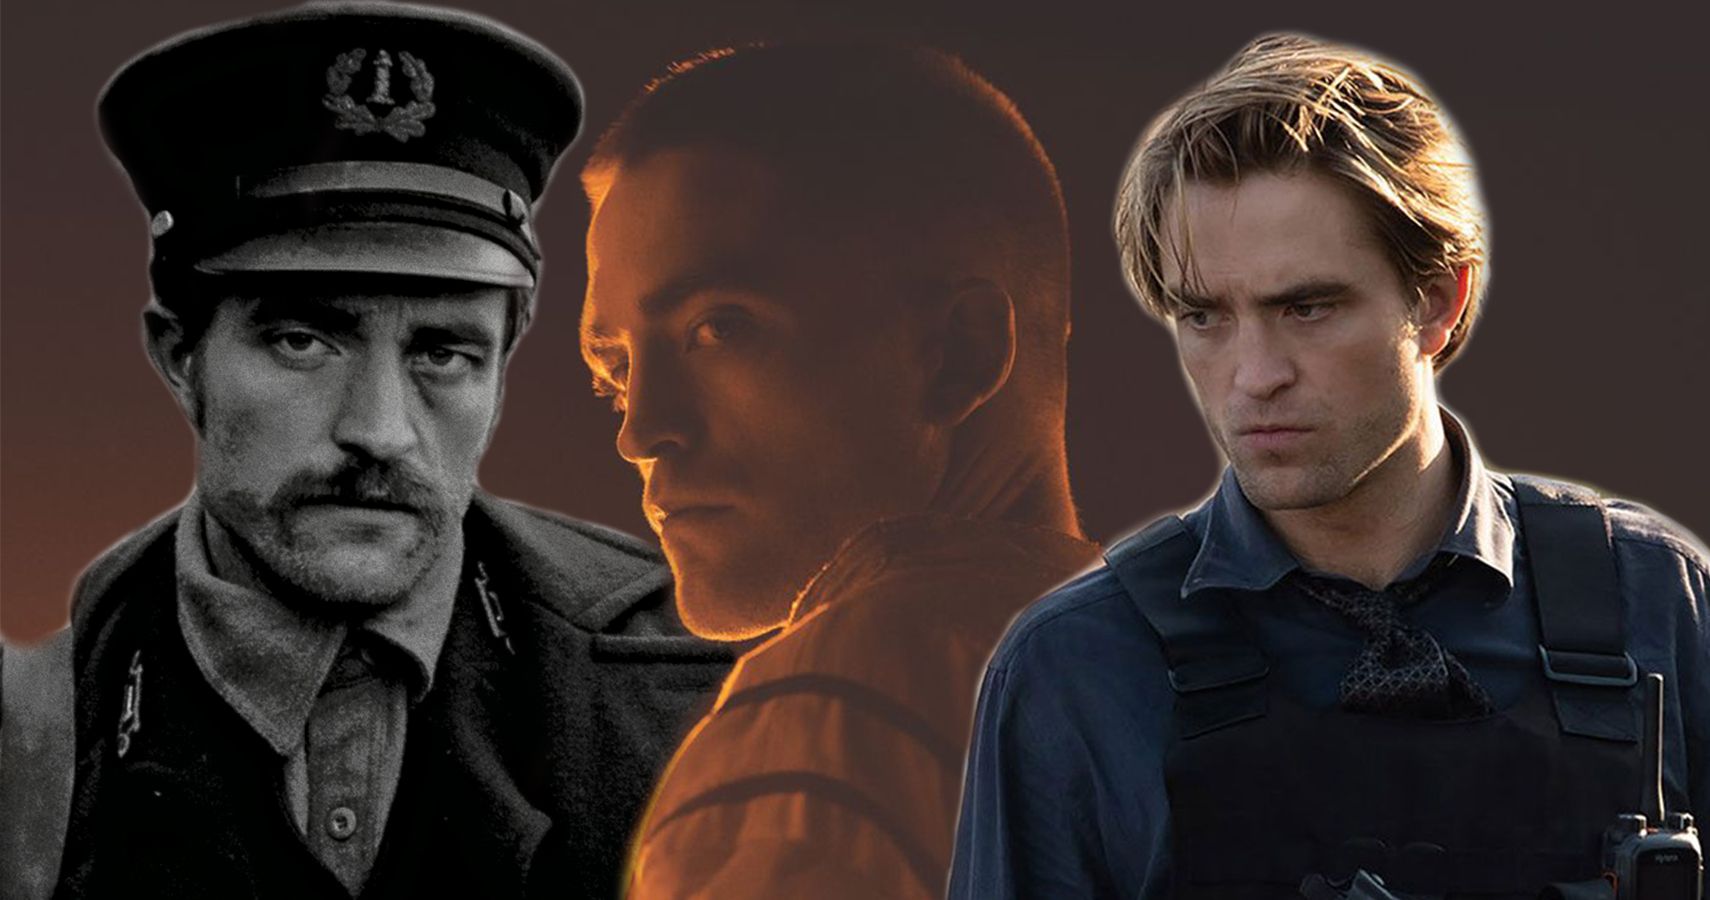 Robert Pattinson His Top 10 Films Ranked (According To Rotten Tomatoes)